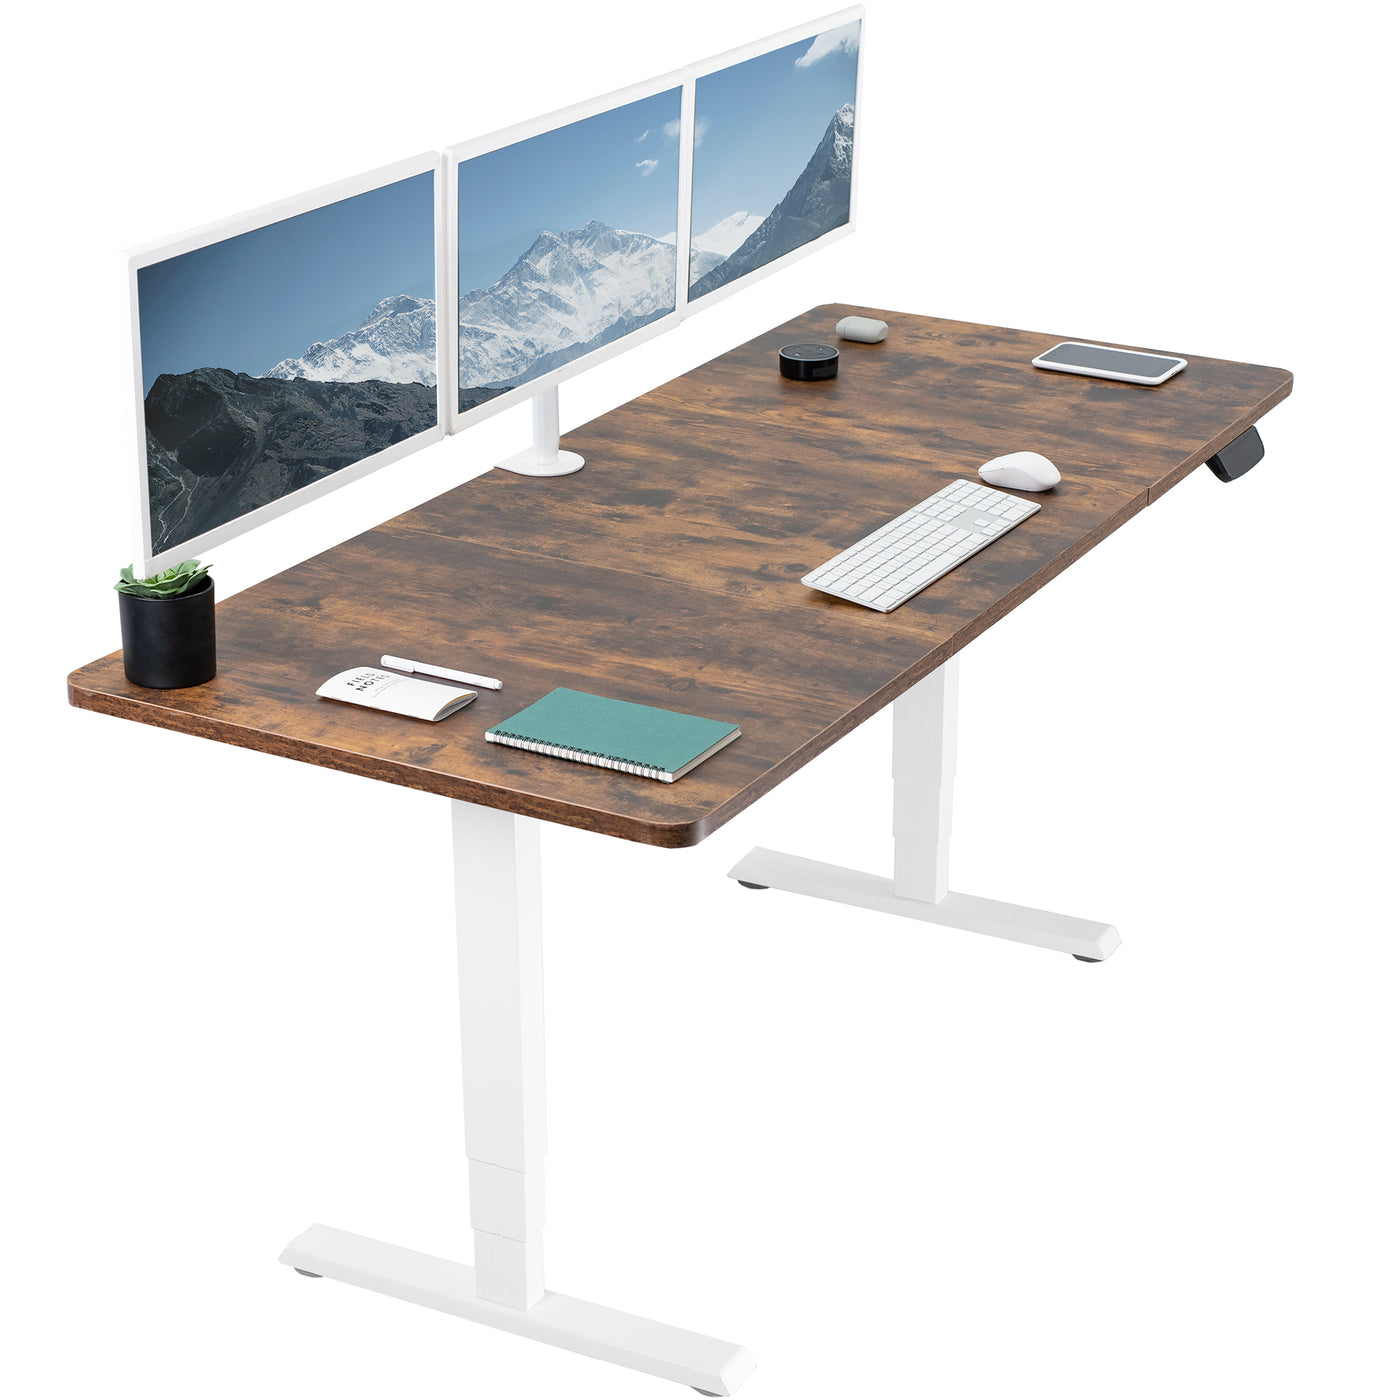 Rustic sturdy sit or stand active workstation with adjustable height using touch screen control panel.